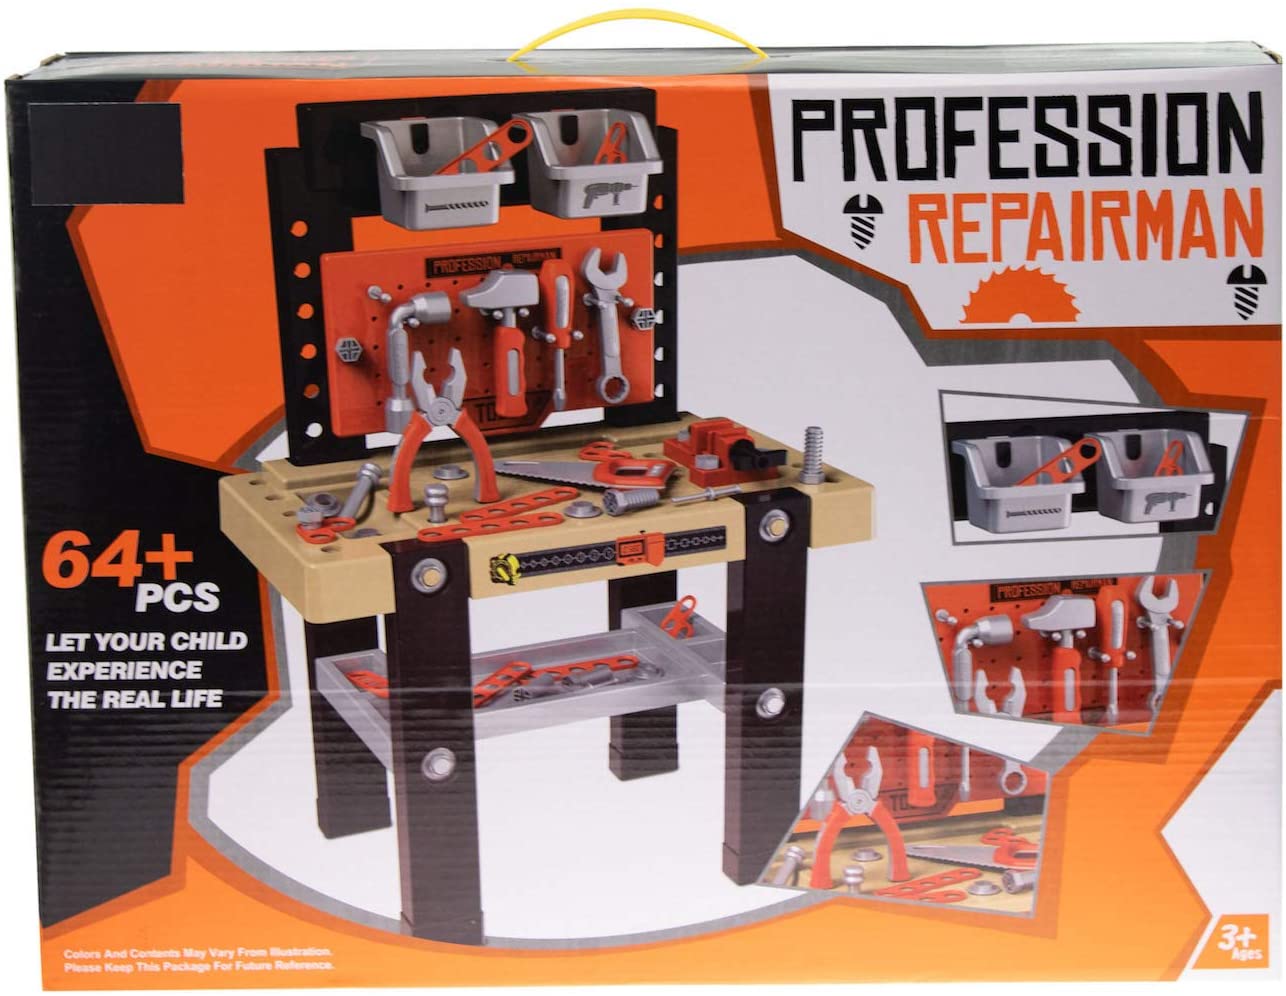 Black and Decker Toy Tool Bench with Tools.